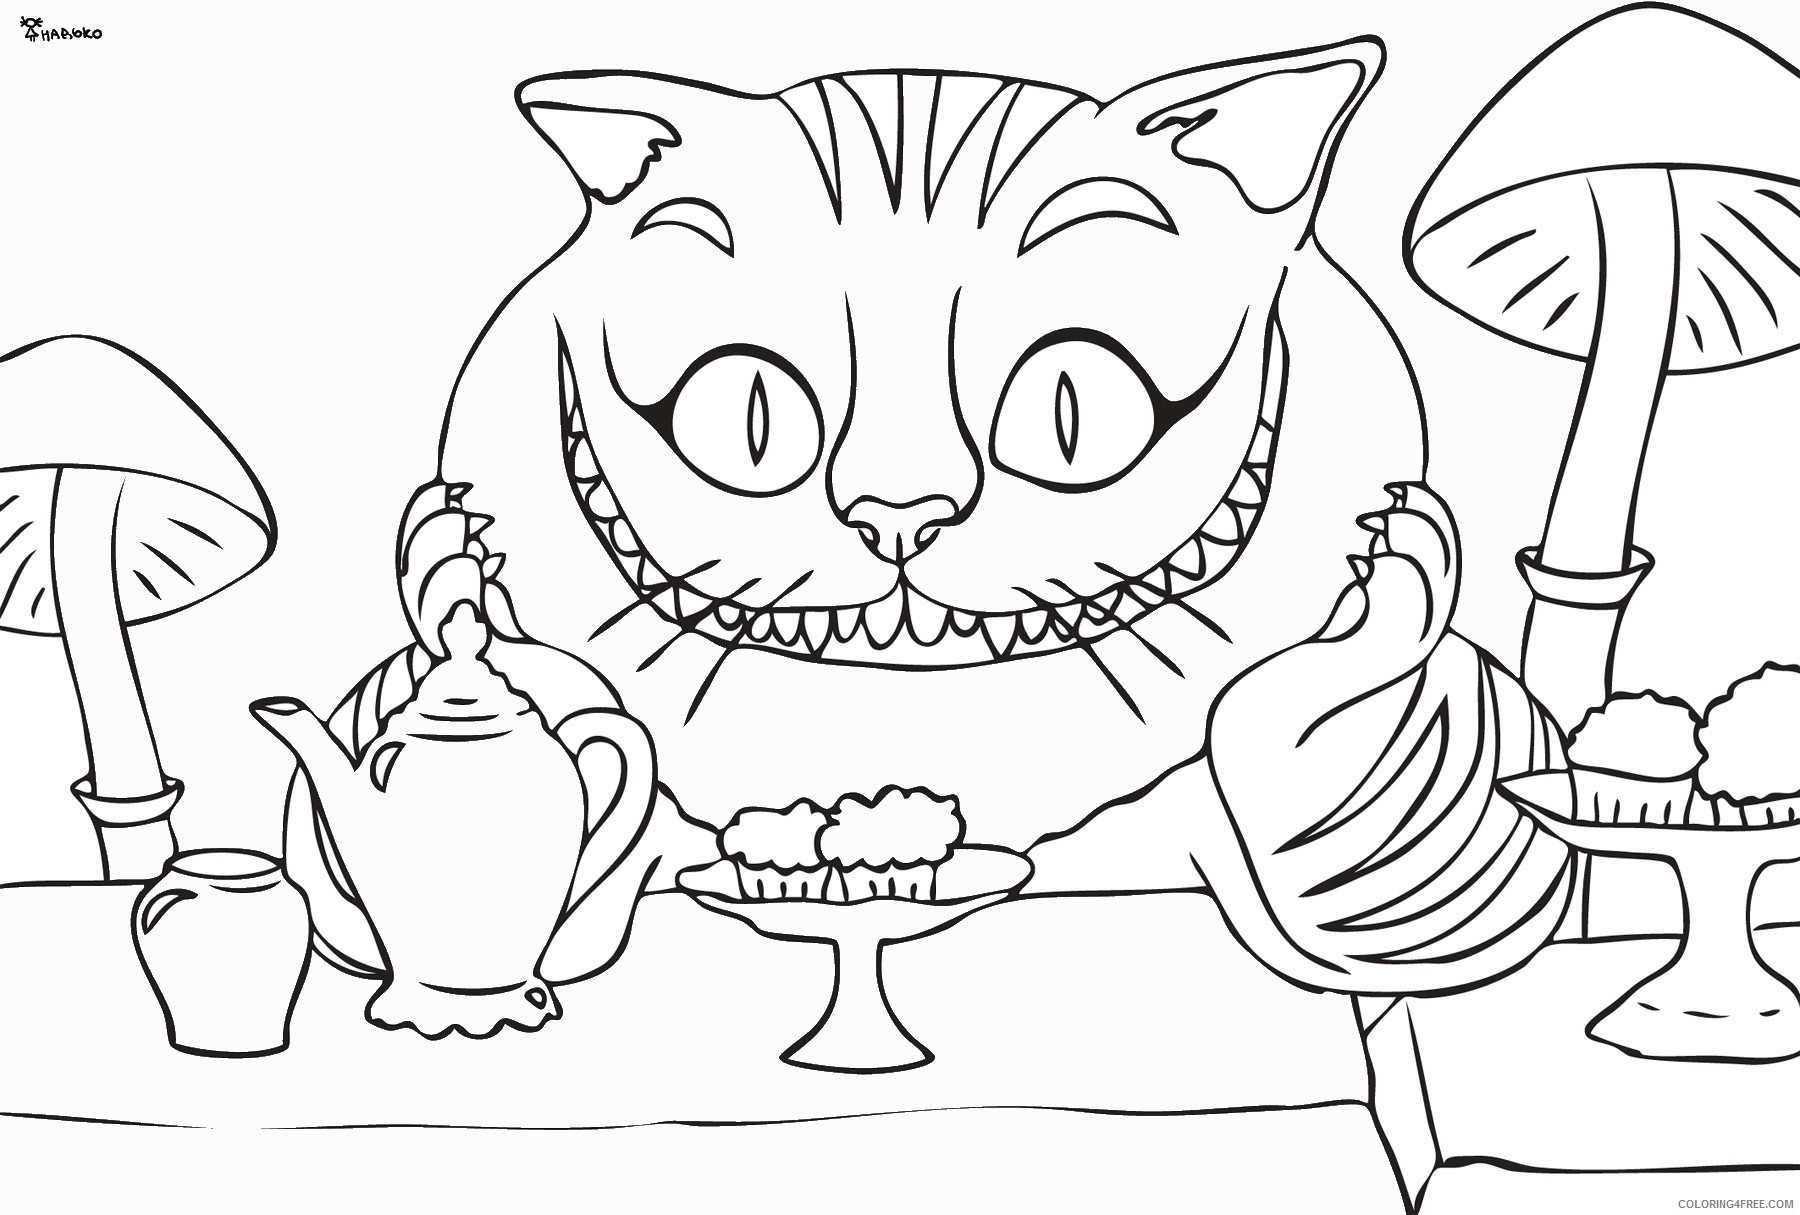 Alice in Wonderland Coloring Pages Cartoons alice_72 Printable 2020 0365 Coloring4free